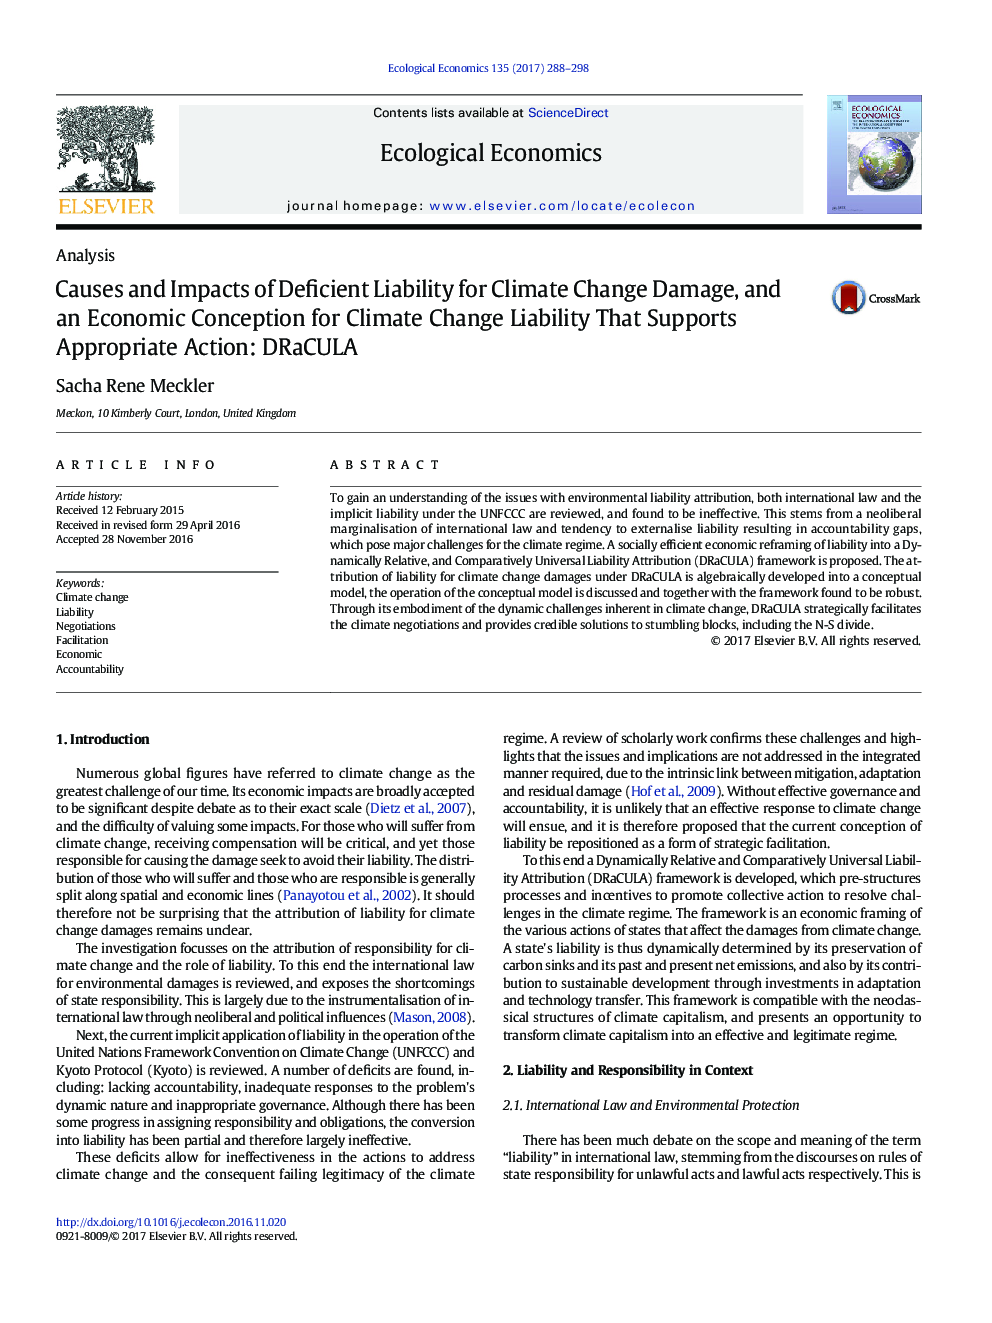 Causes and Impacts of Deficient Liability for Climate Change Damage, and an Economic Conception for Climate Change Liability That Supports Appropriate Action: DRaCULA